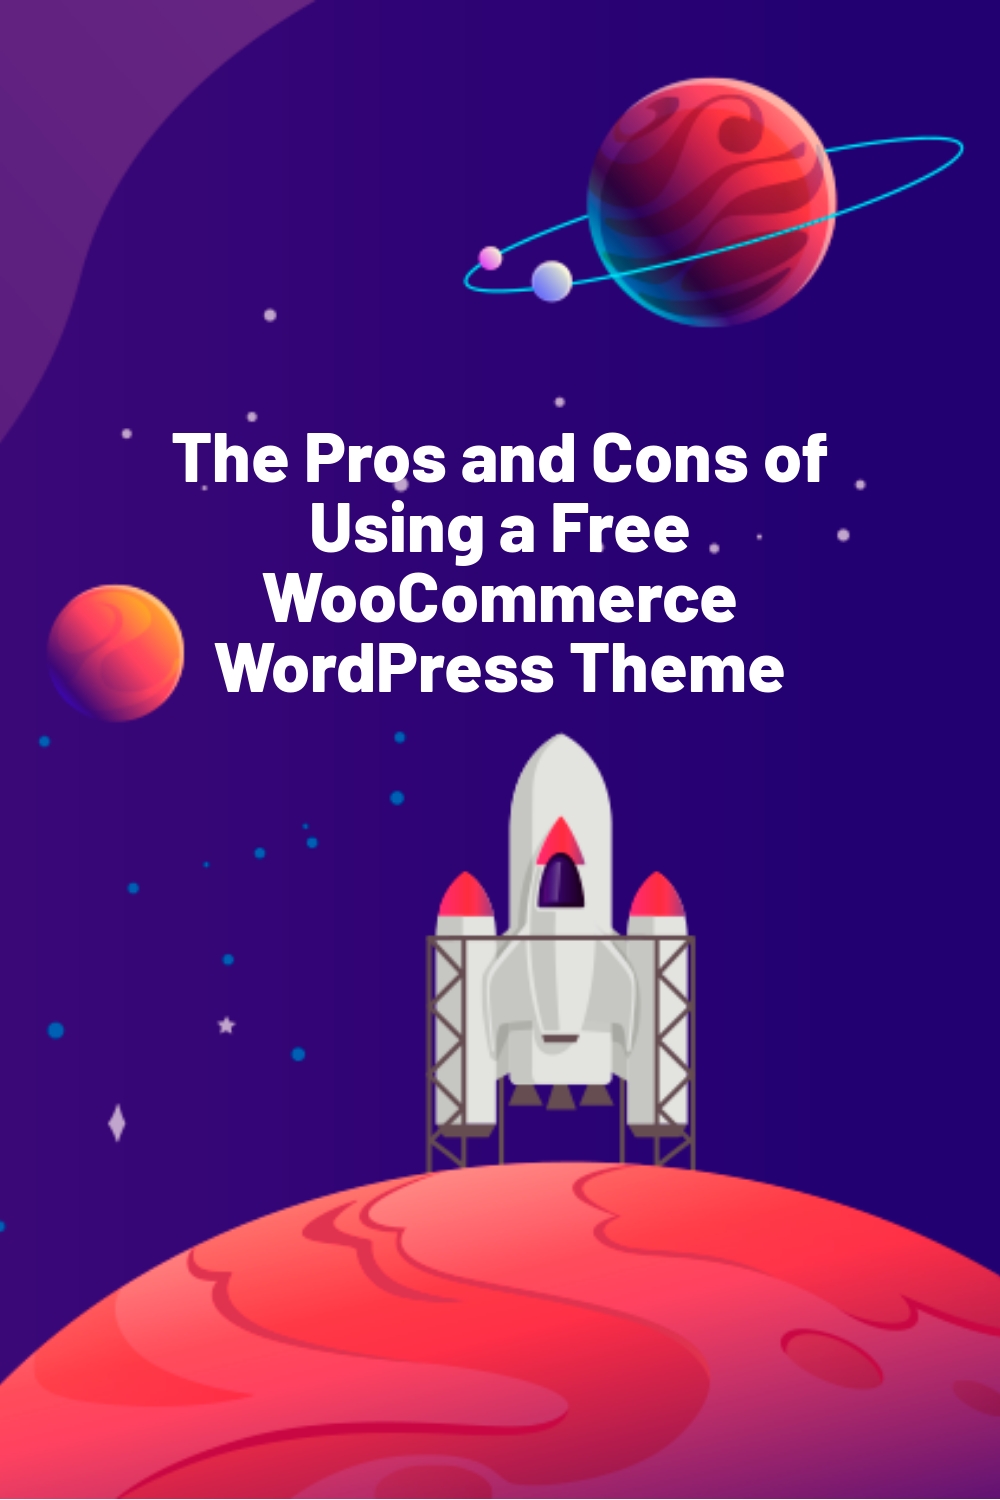 The Pros and Cons of Using a Free WooCommerce WordPress Theme